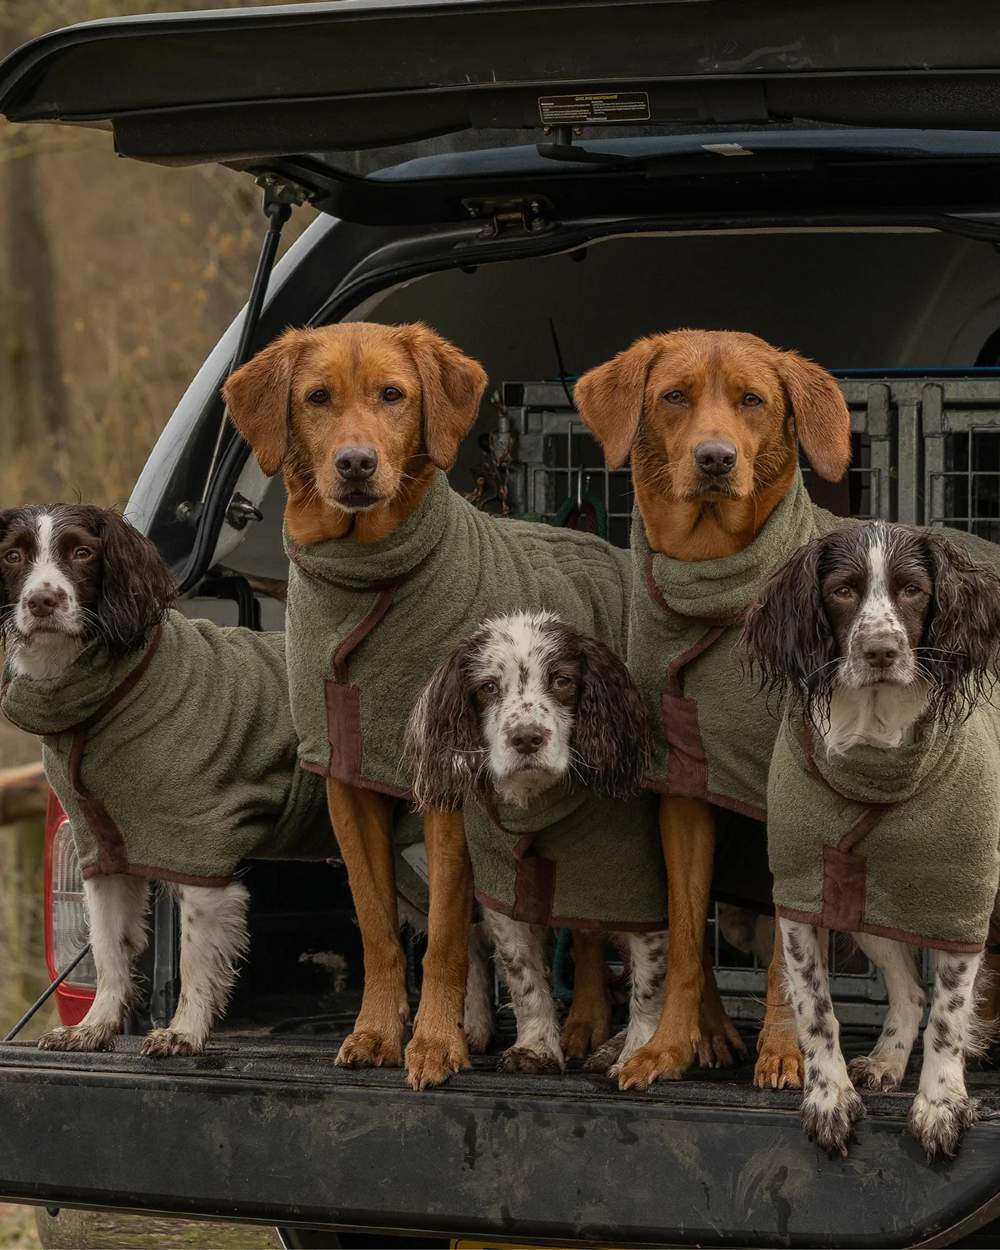 Moss coloured Ruff &amp; Tumble Country Dog Drying Coat on group of dogs in car boot 